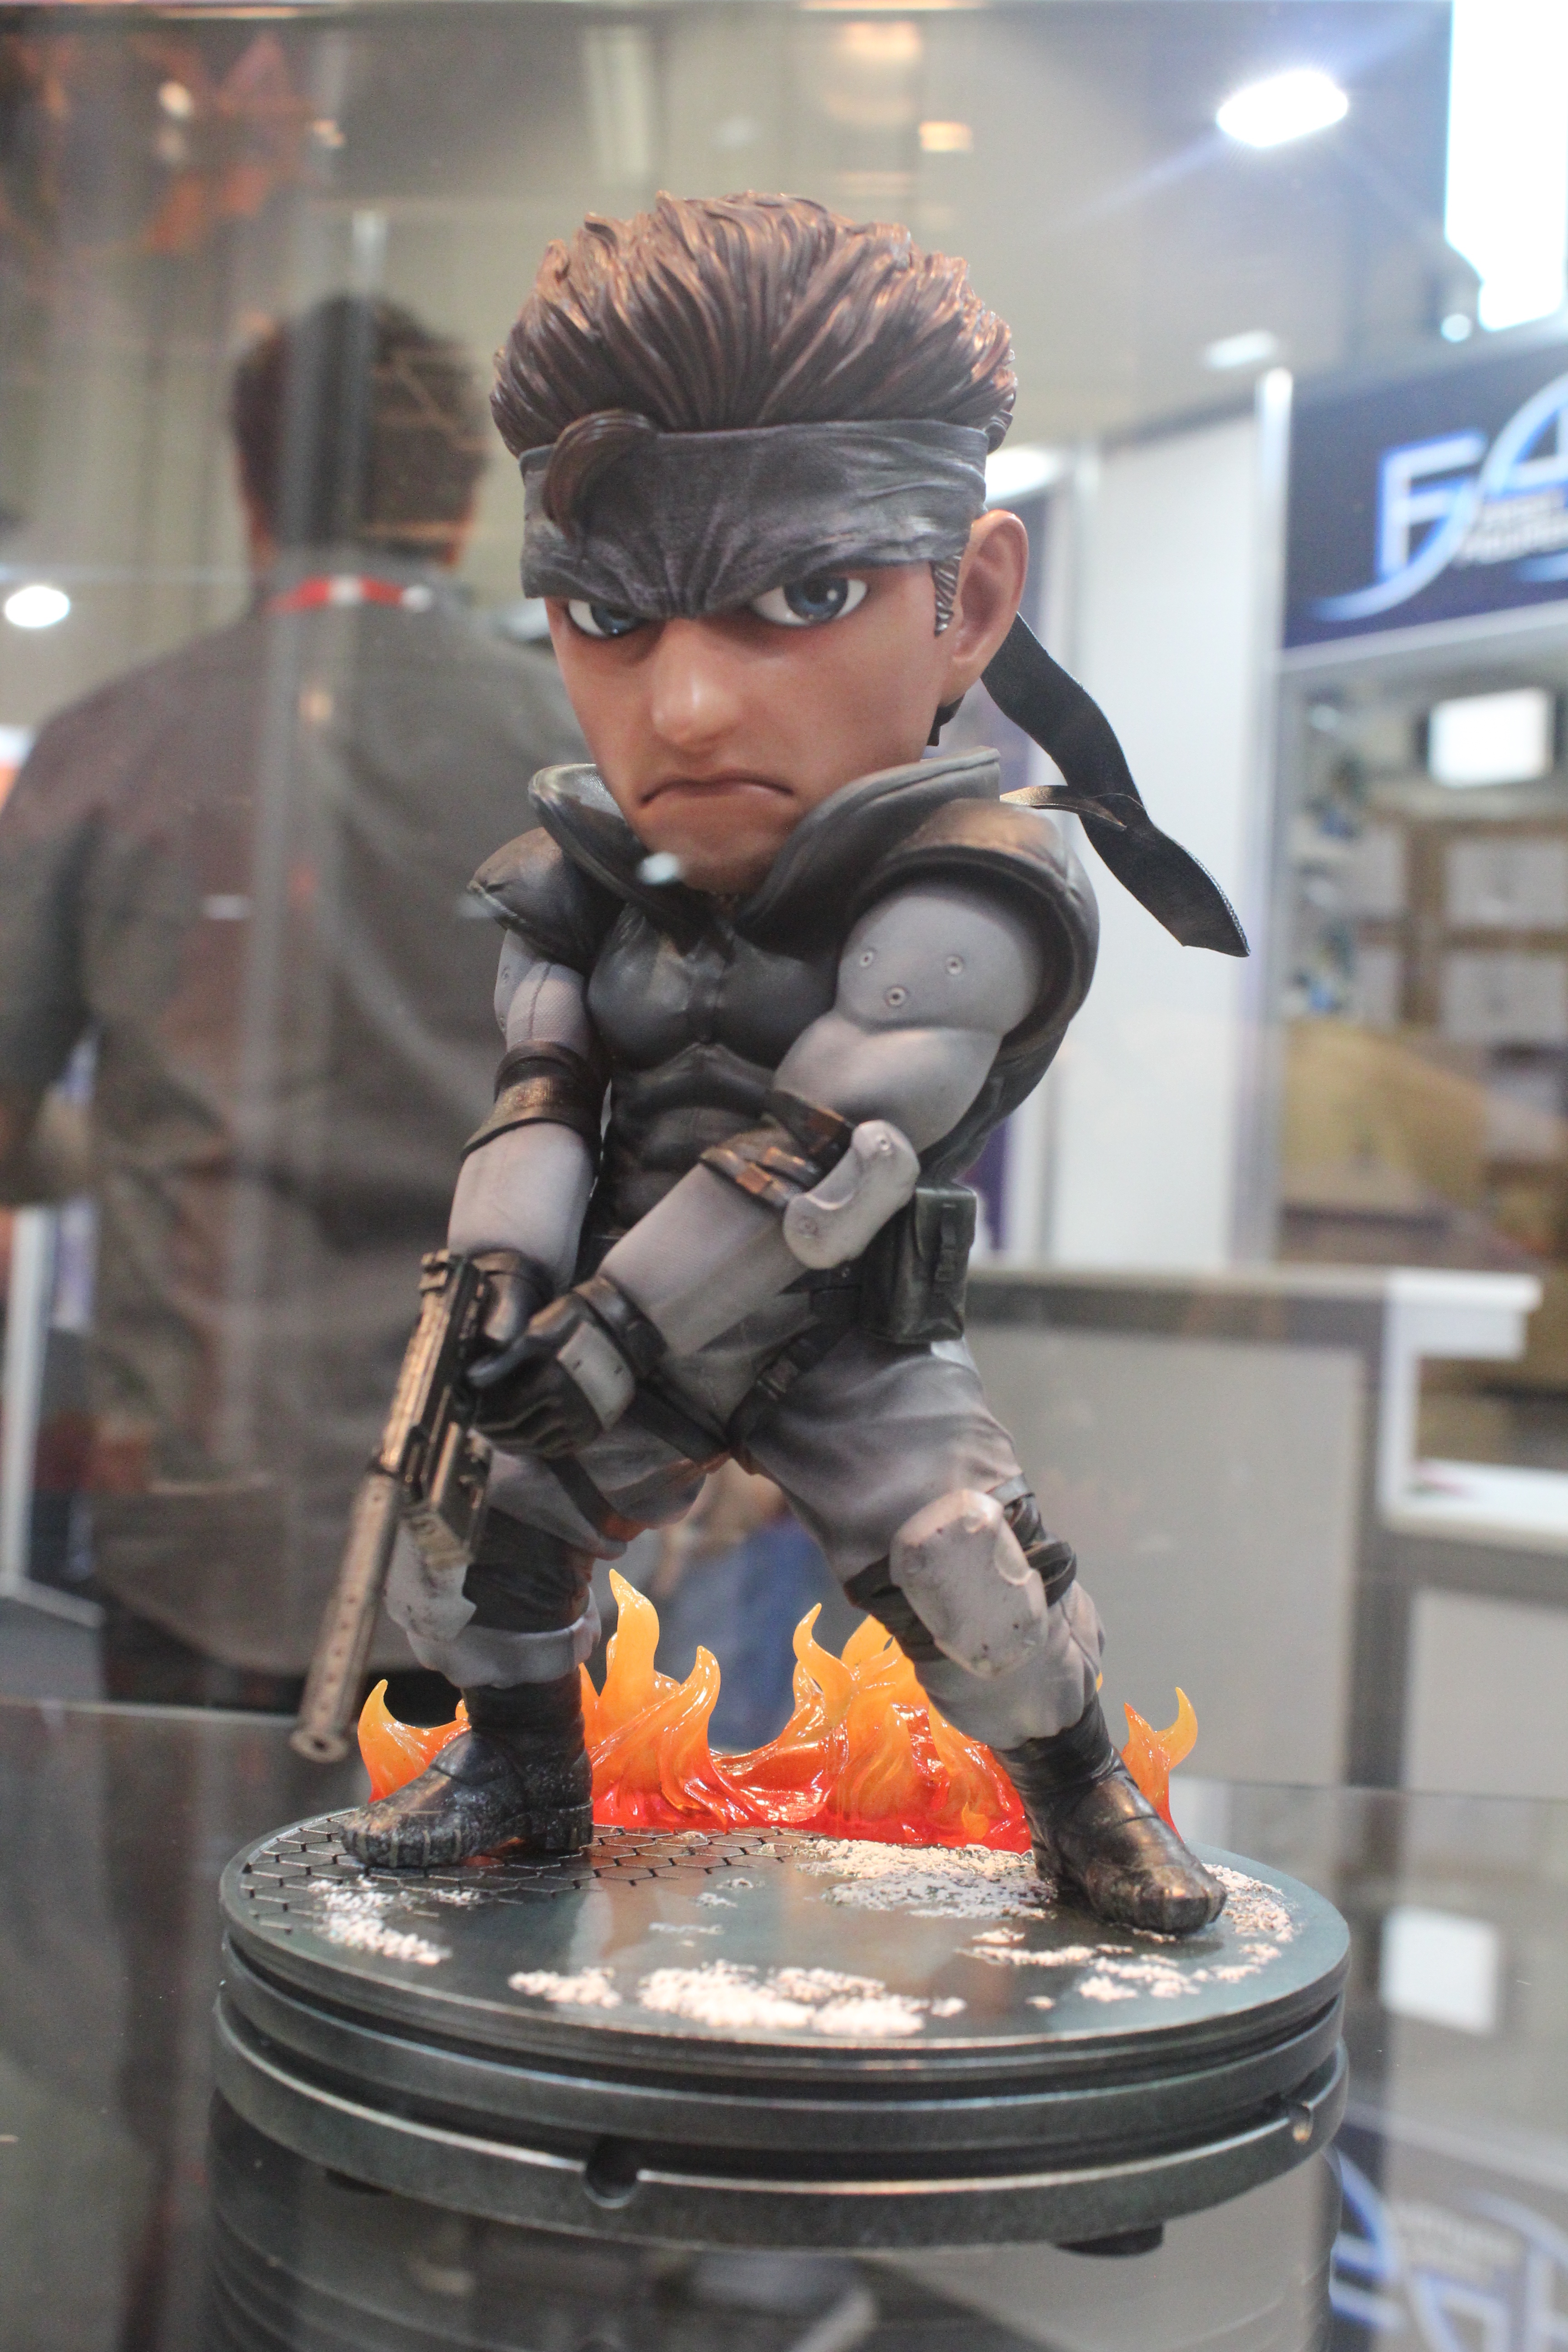 Solid Snake SD (Exclusive Edition)